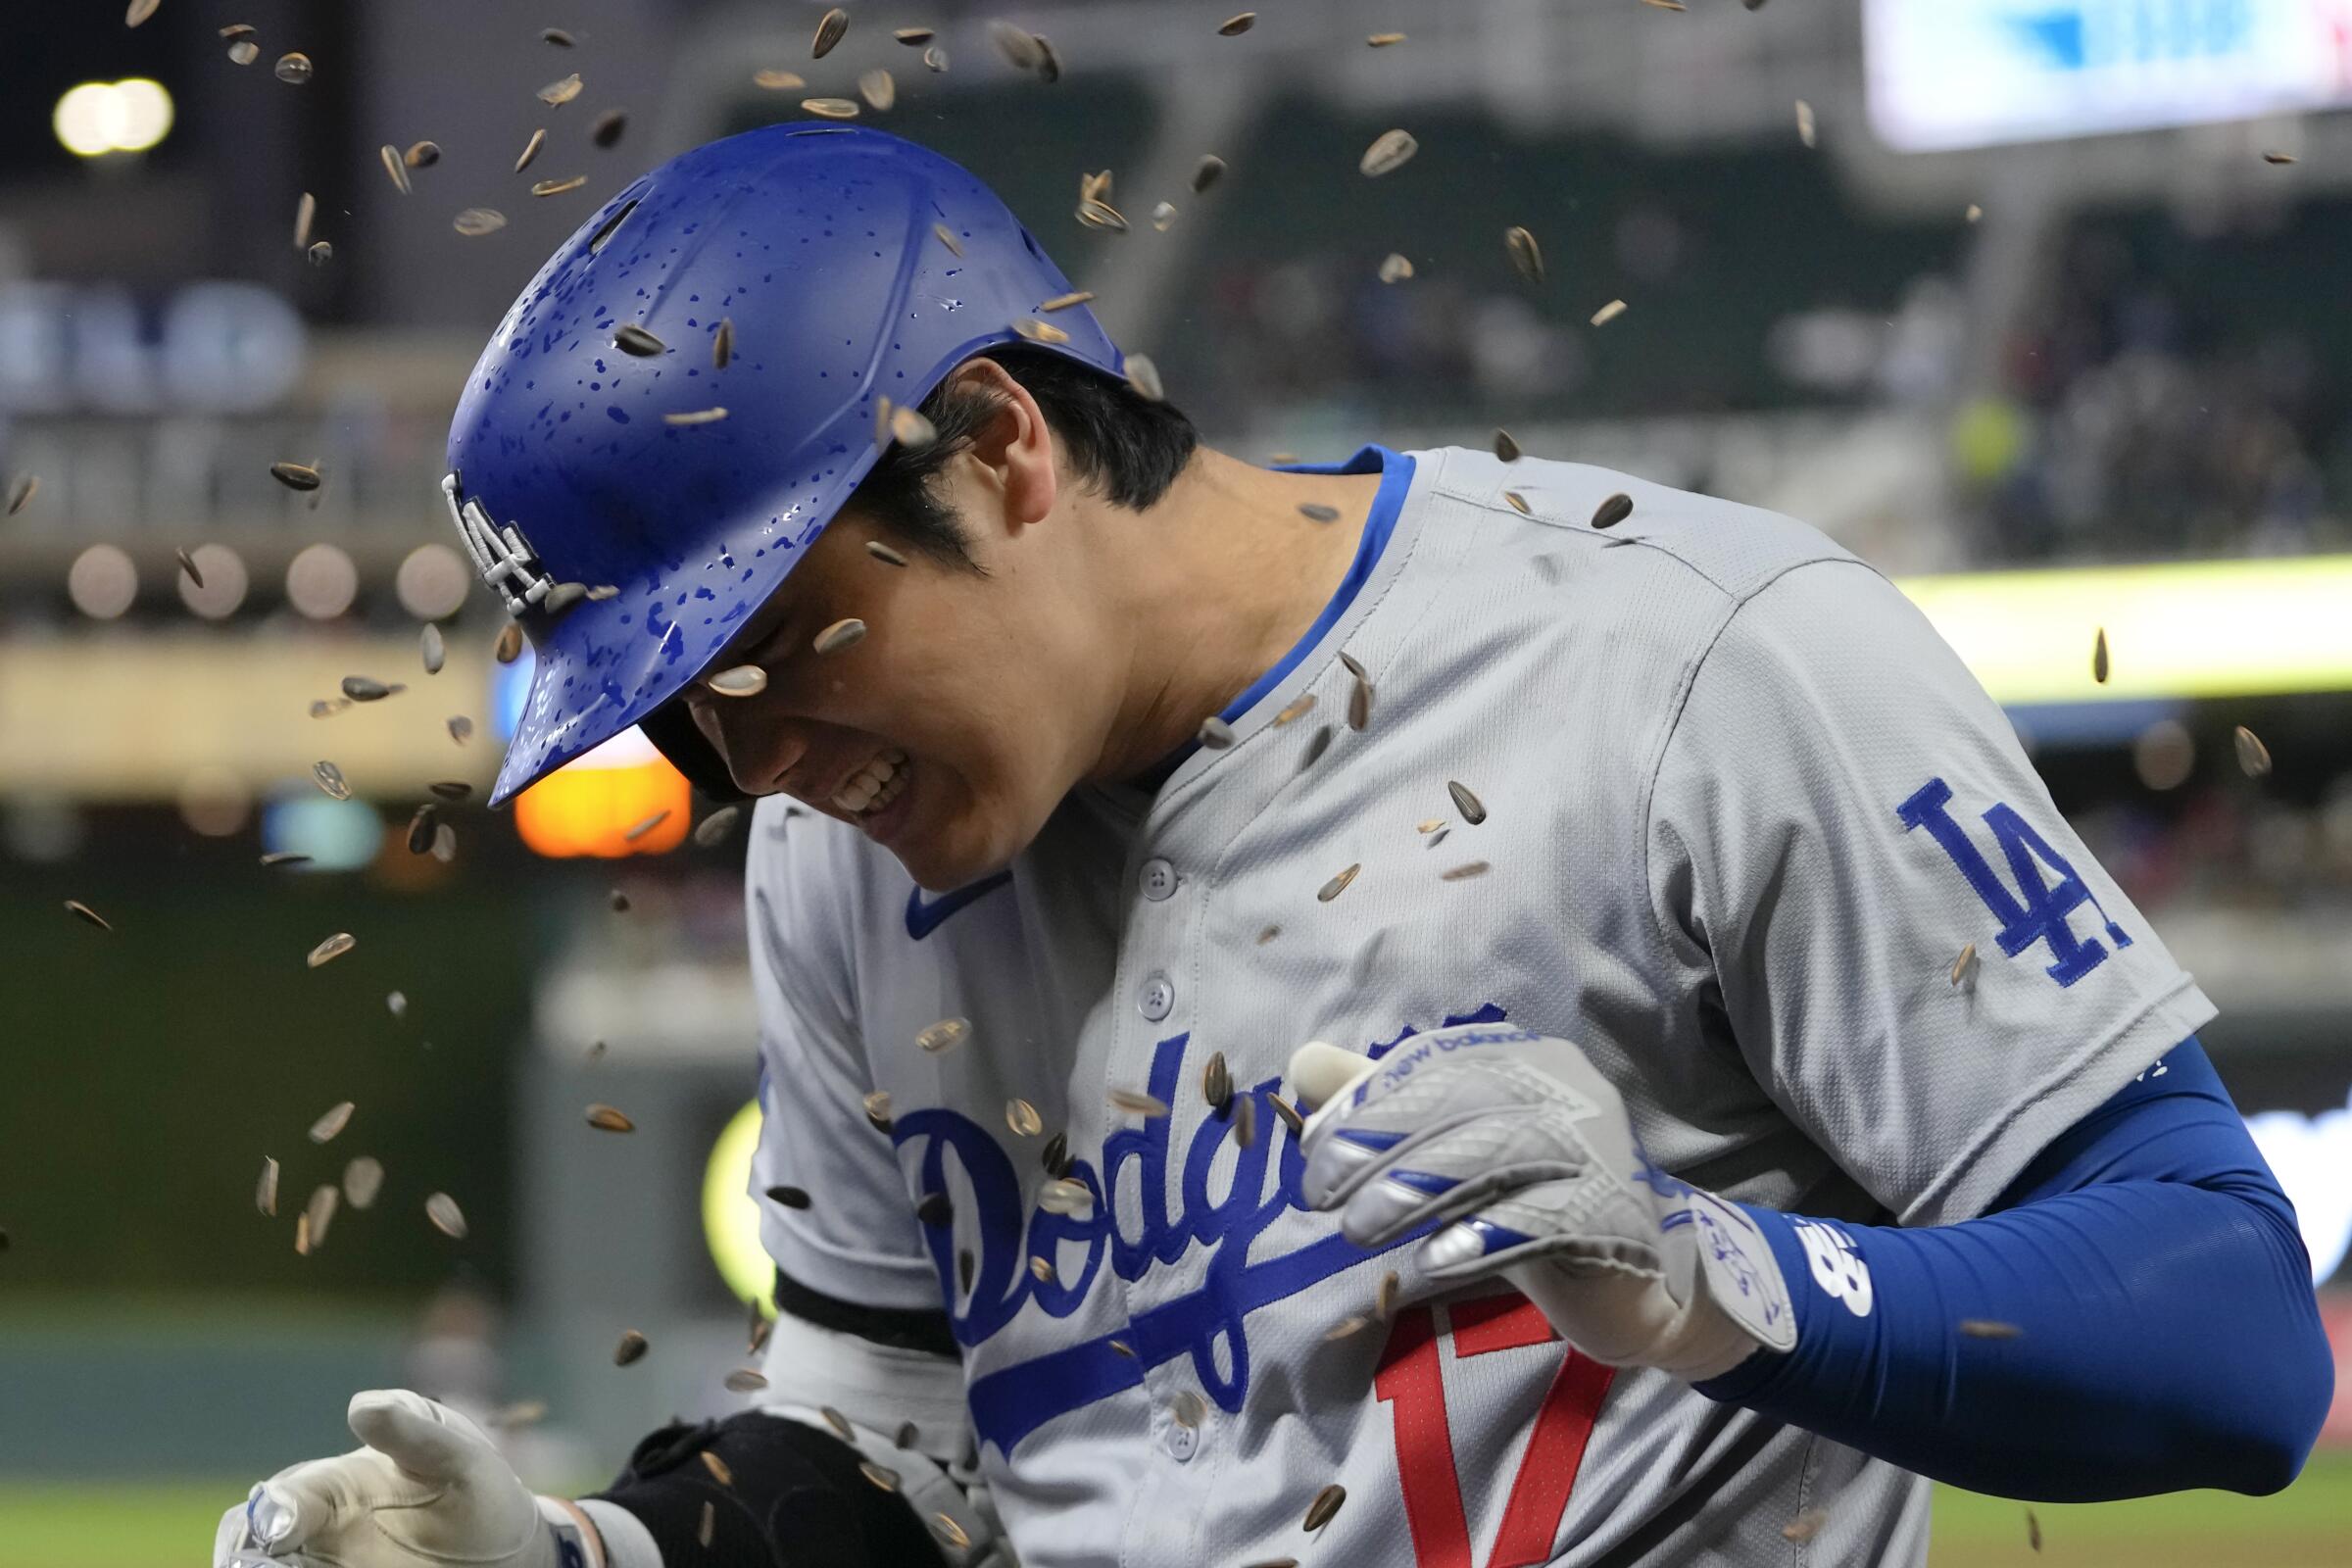 Dodgers star Shohei Ohtani is showered with sunflower seeds after hitting a solo home run against the Minnesota Twins.